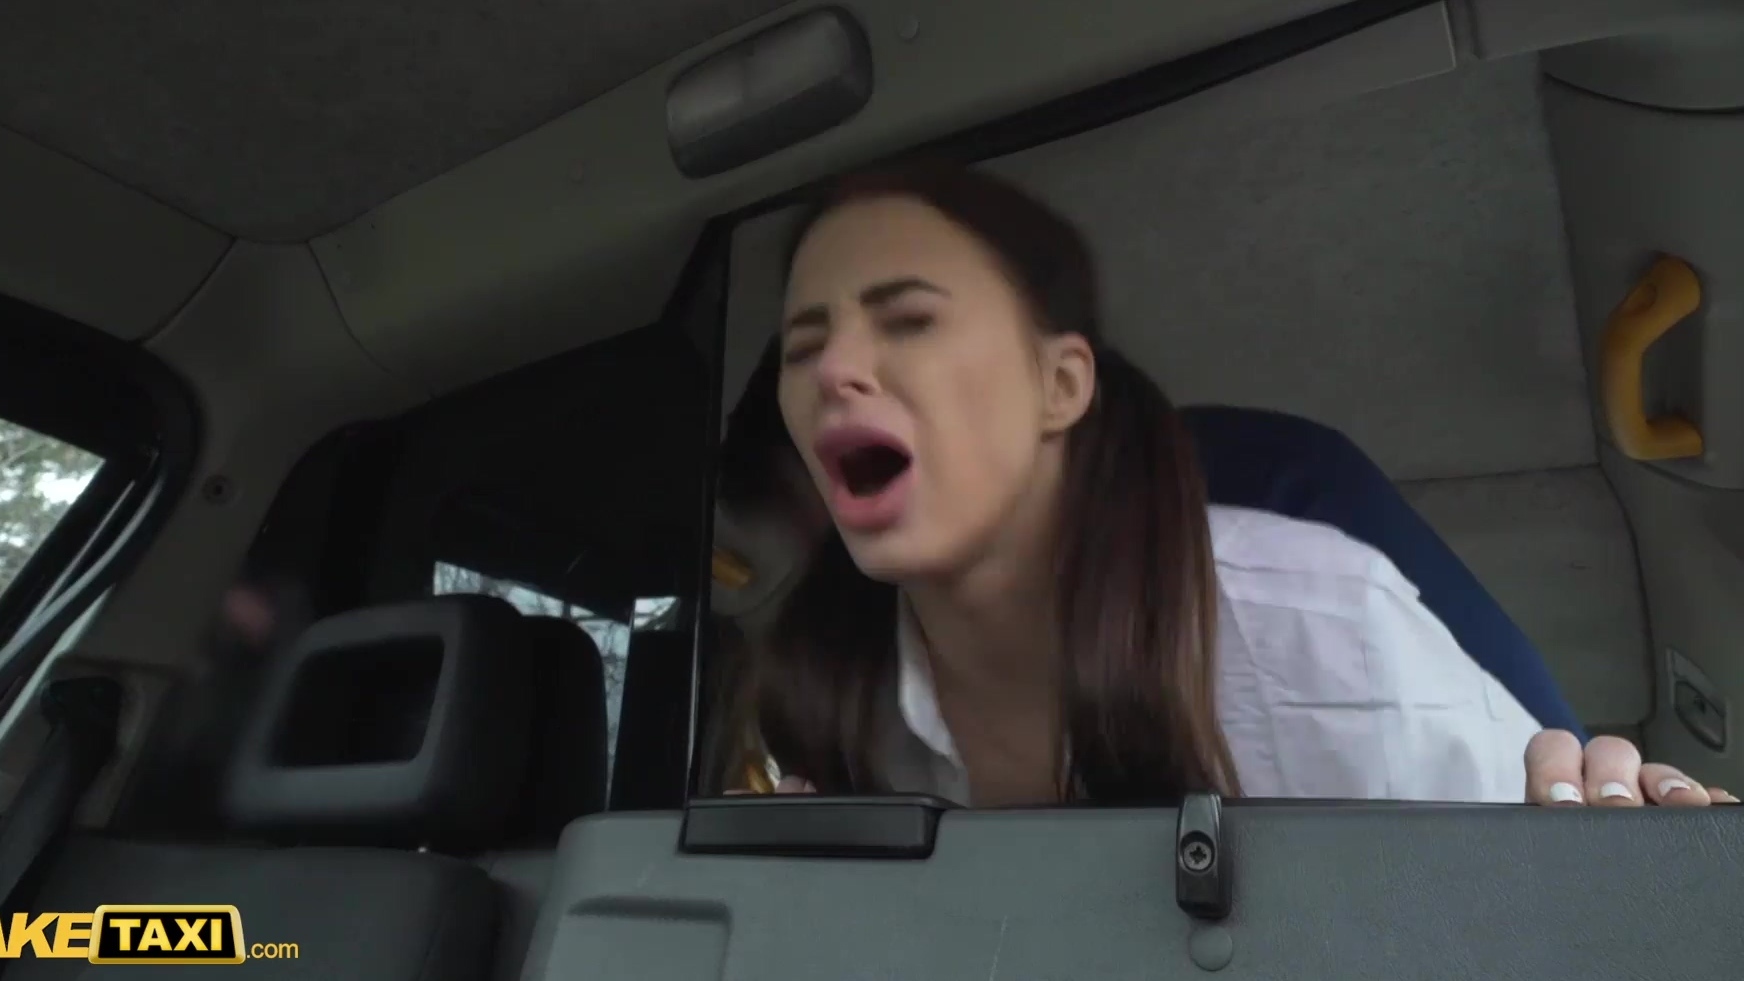 Taxi Sex - Brunette teen pays her fire by excellent sex skills in a taxi cab